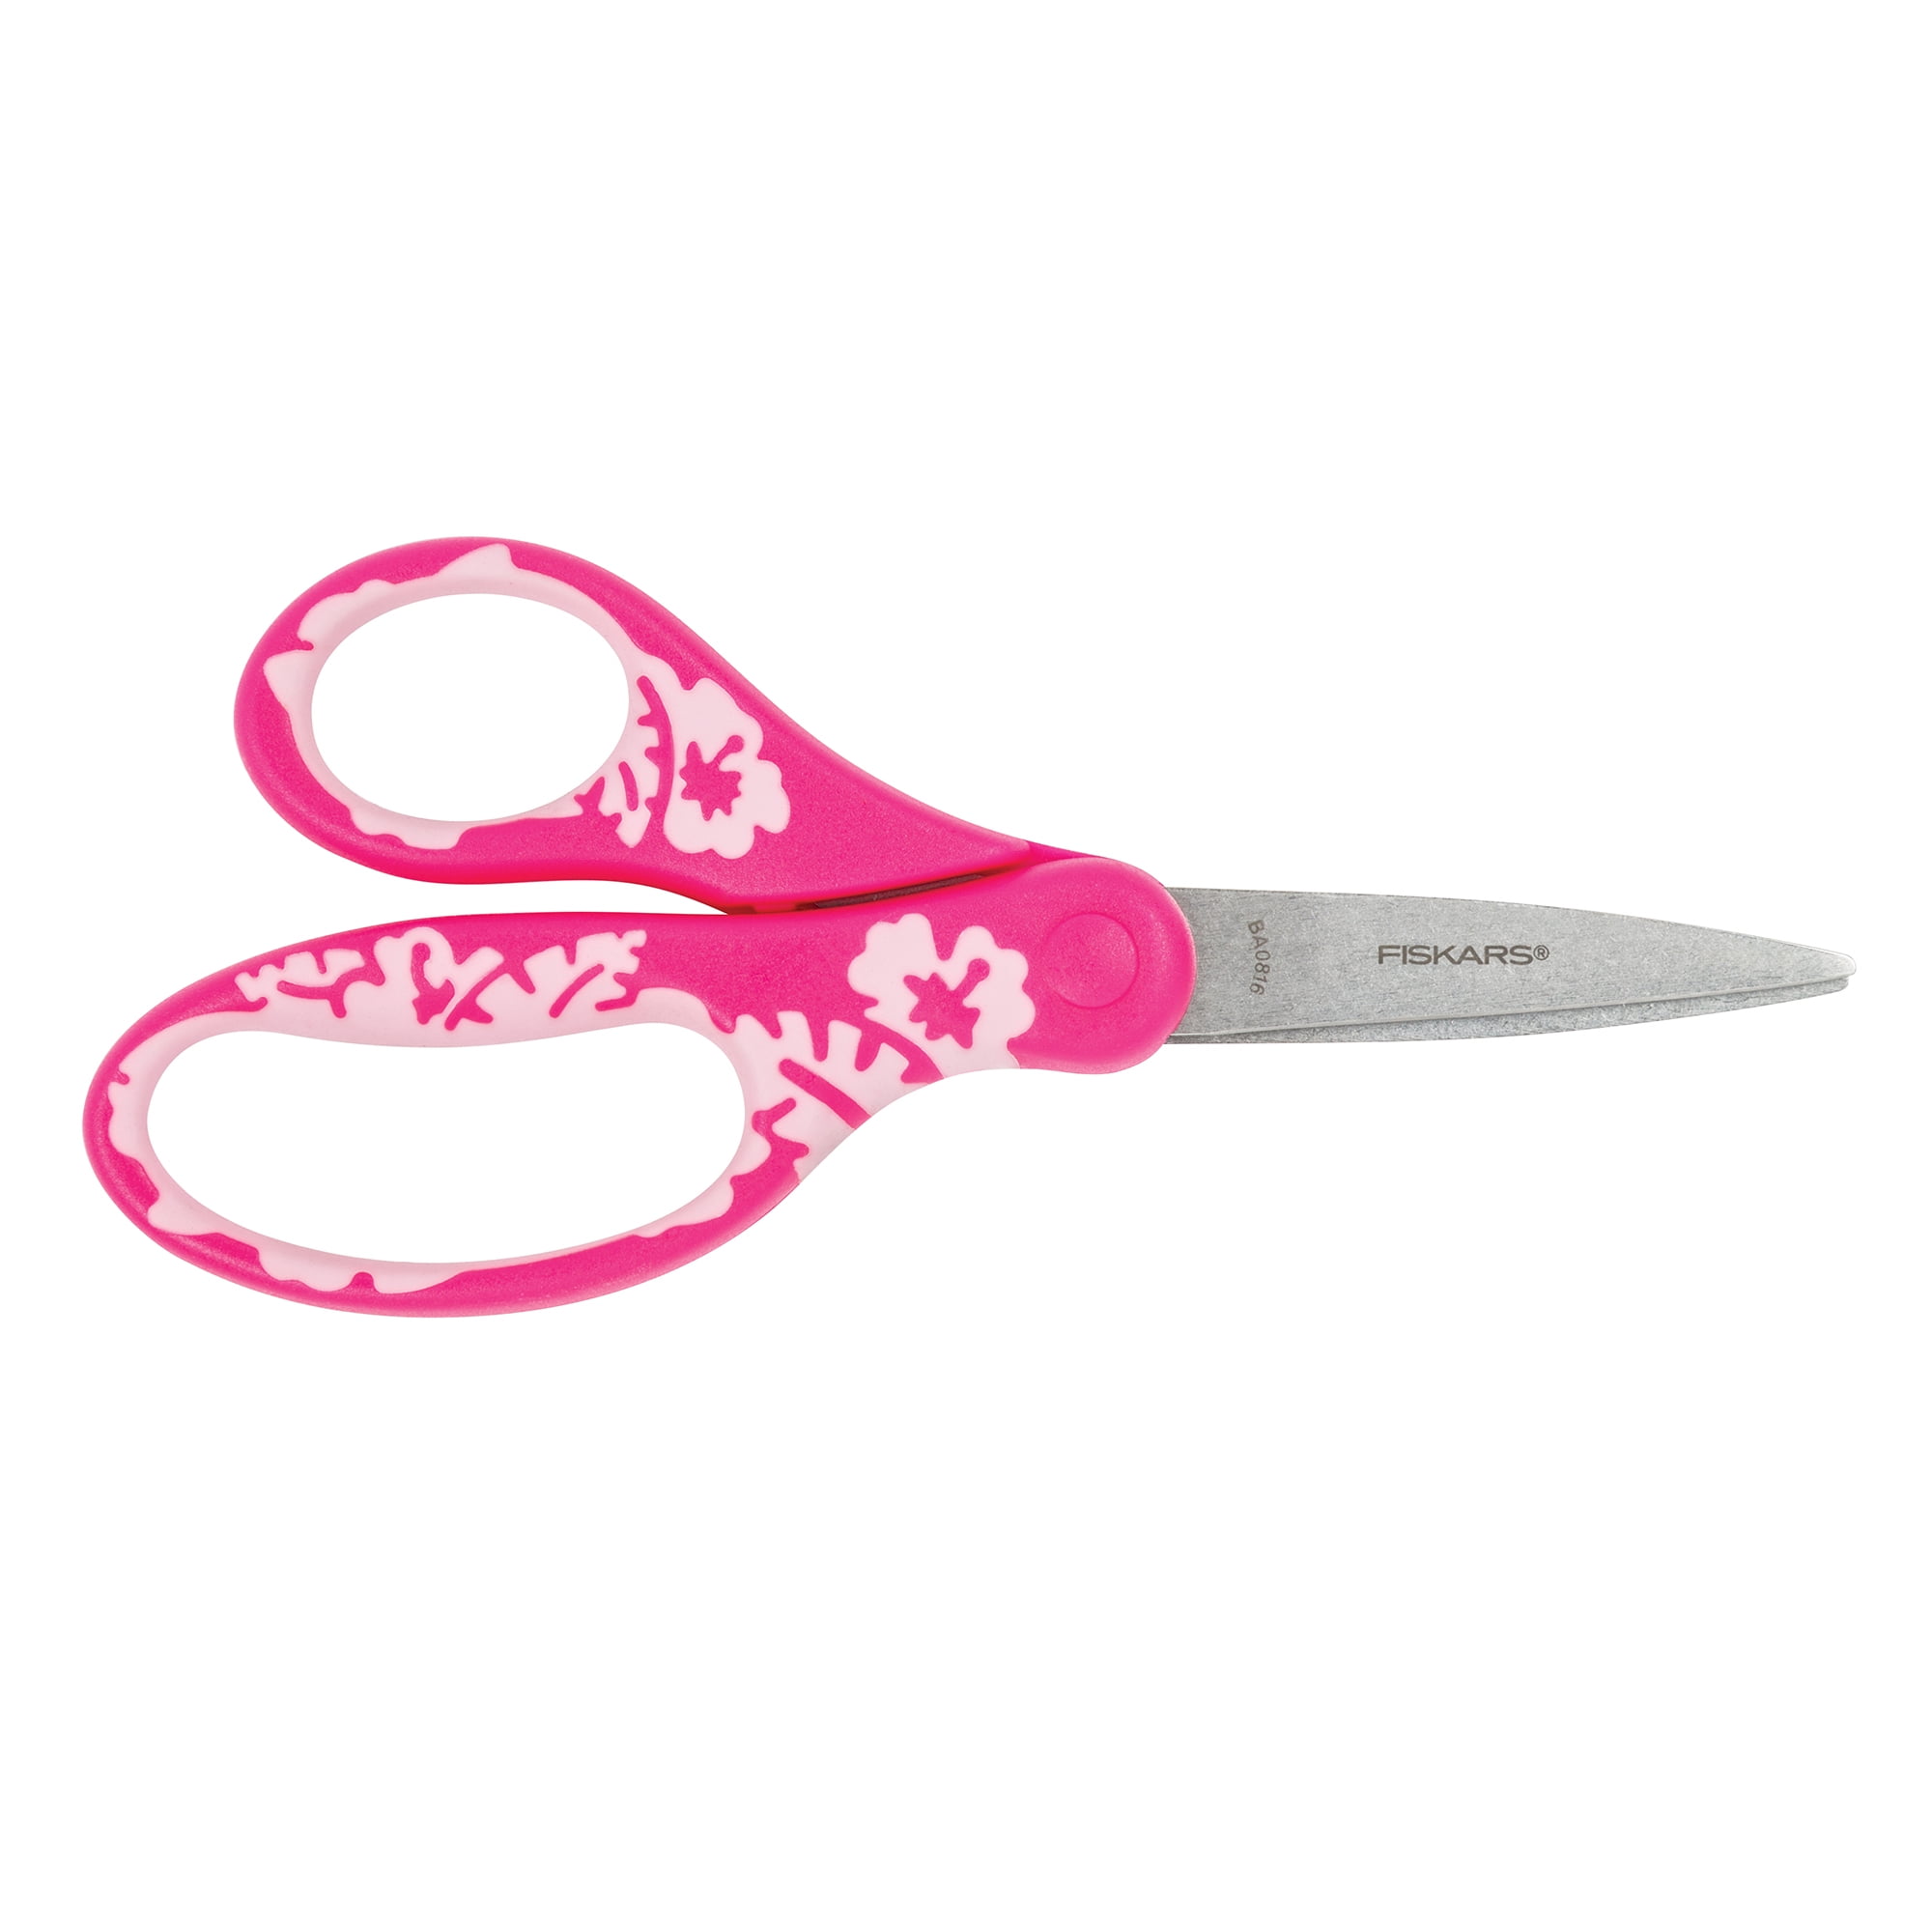  Fiskars 6 Big Kids Scissors 8-11 - Scissors for School or  Crafting - Back to School Supplies - Color May Vary : Toys & Games